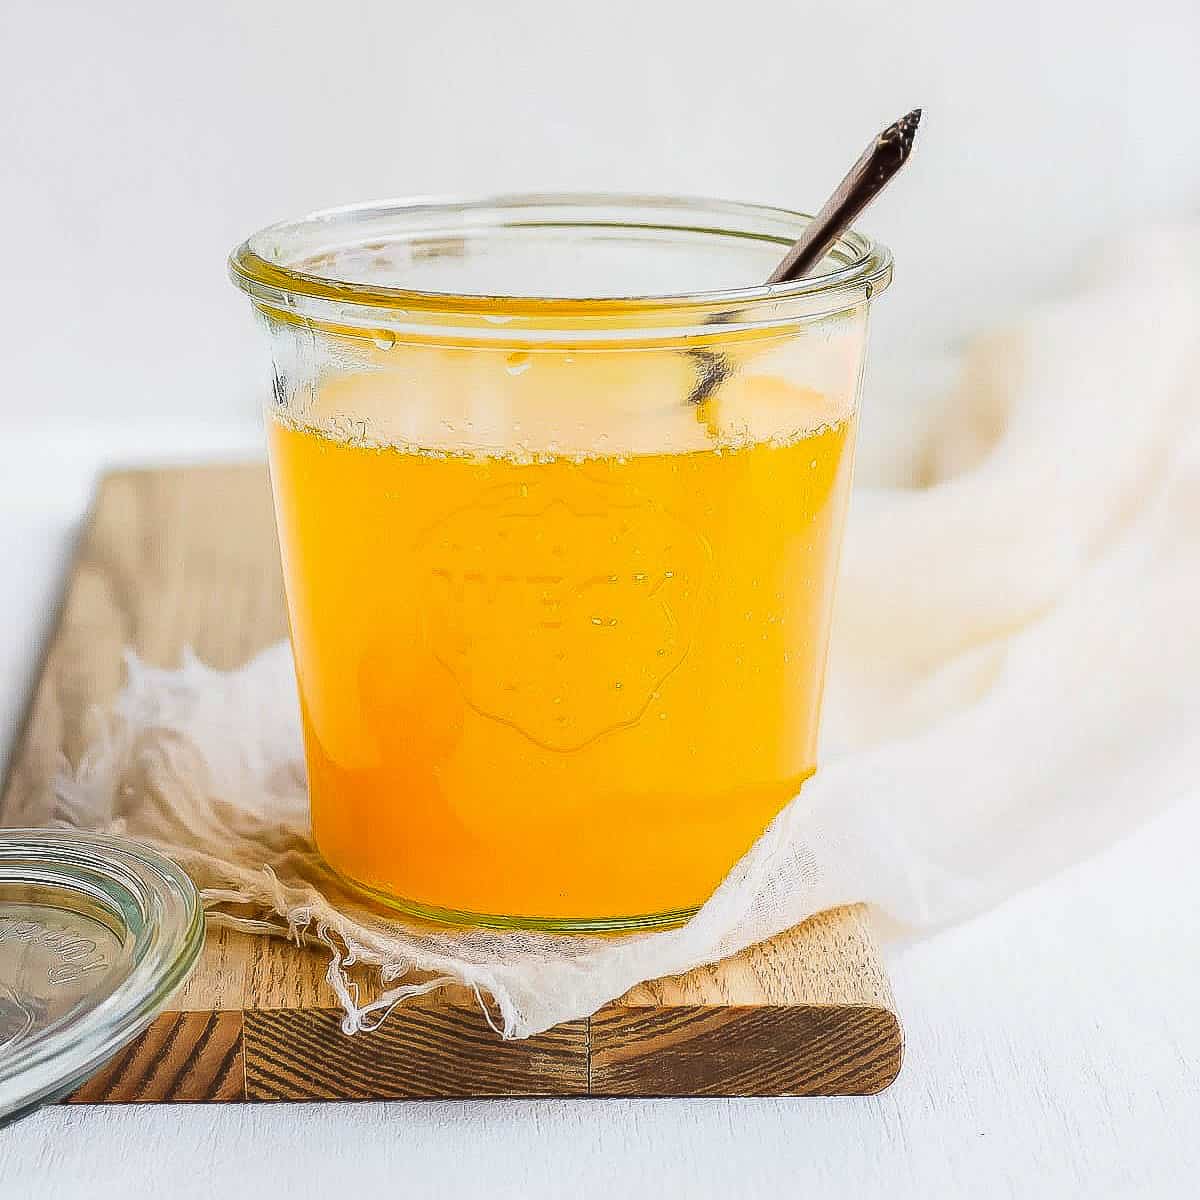 How to Make Liquid Butter - Clarified Butter - How to Make Ghee